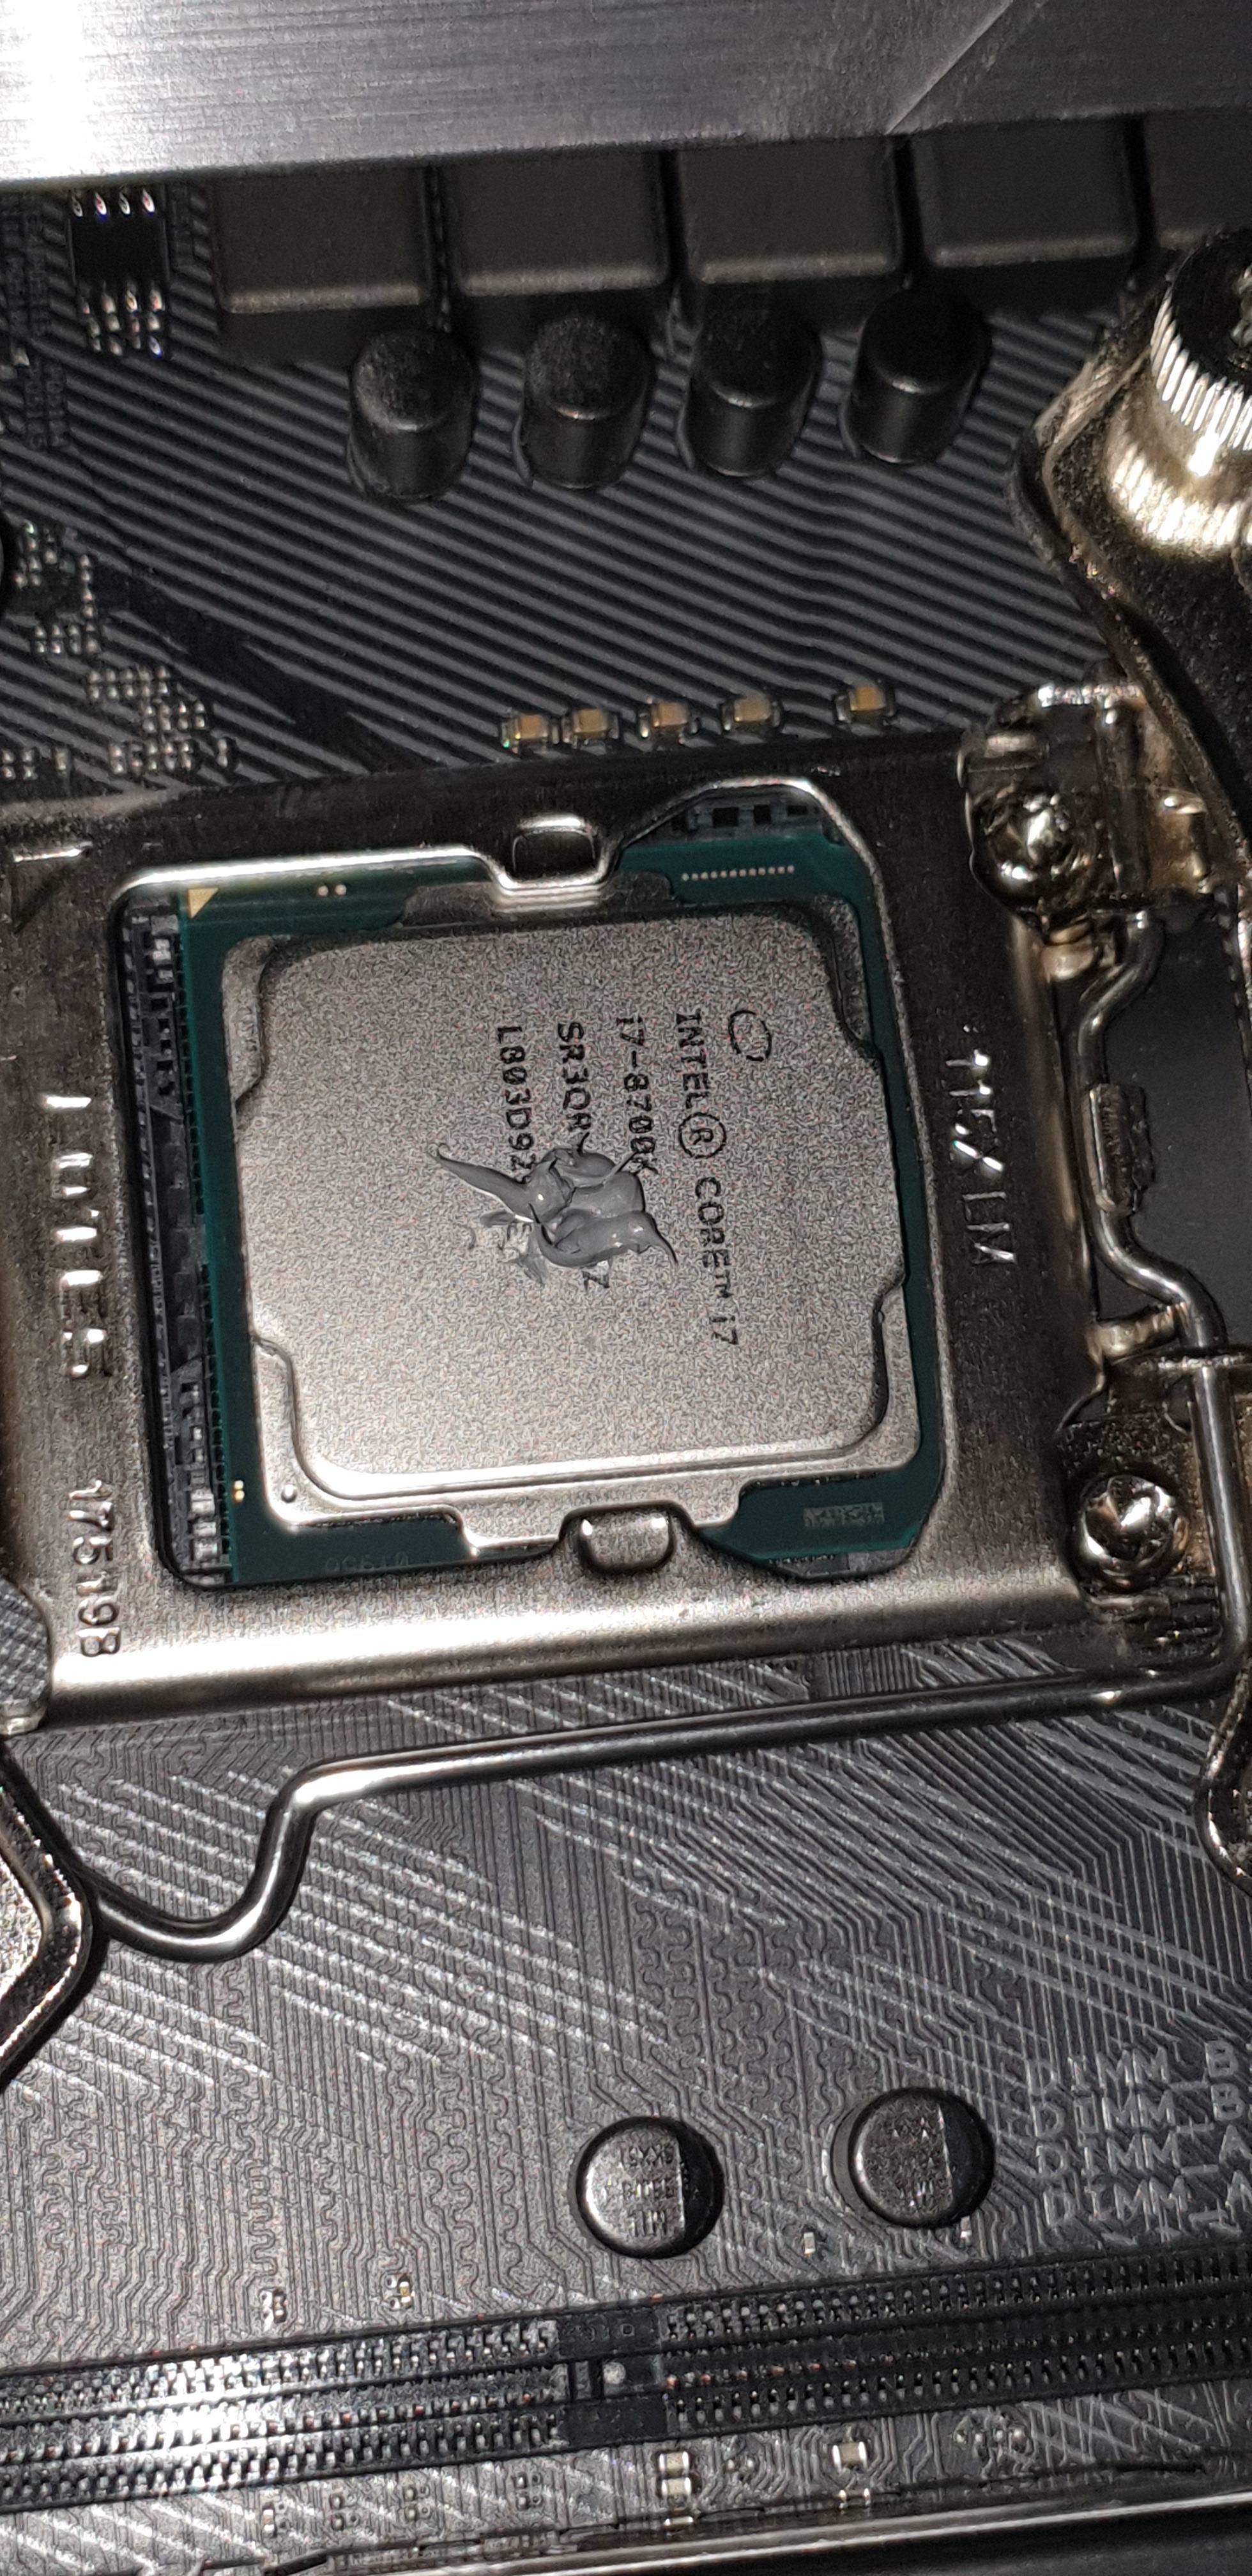 How much thermal paste should I use?